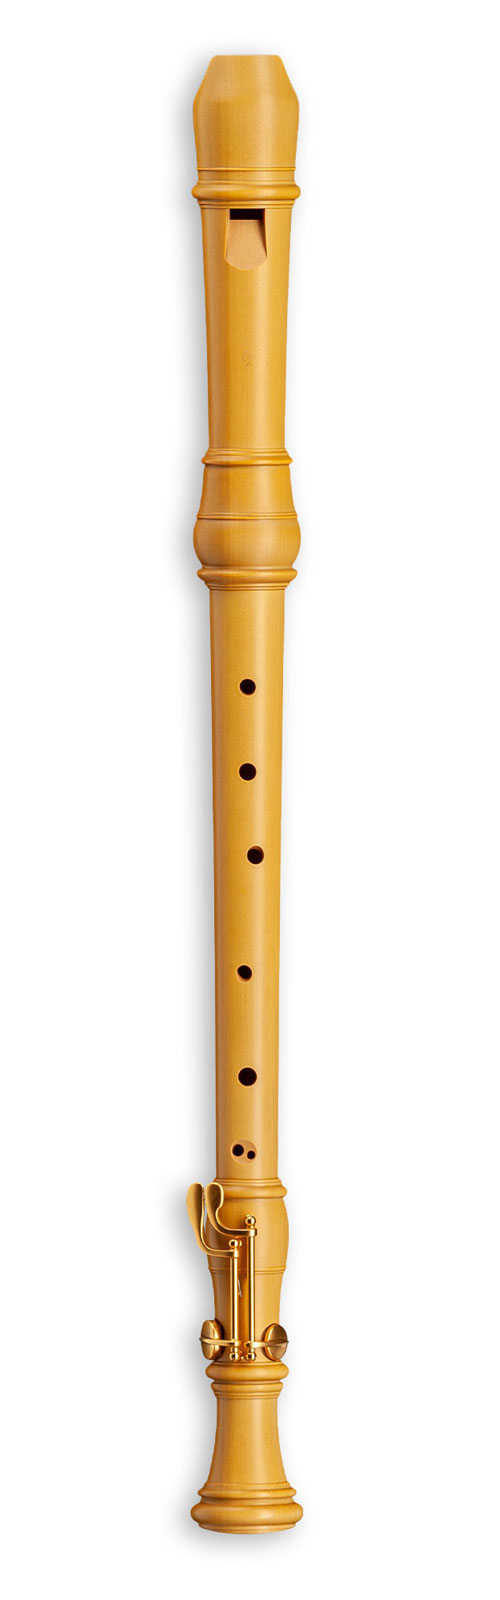 MOLLENHAUER DENNER TENOR WITH DOUBLE KEY 5432